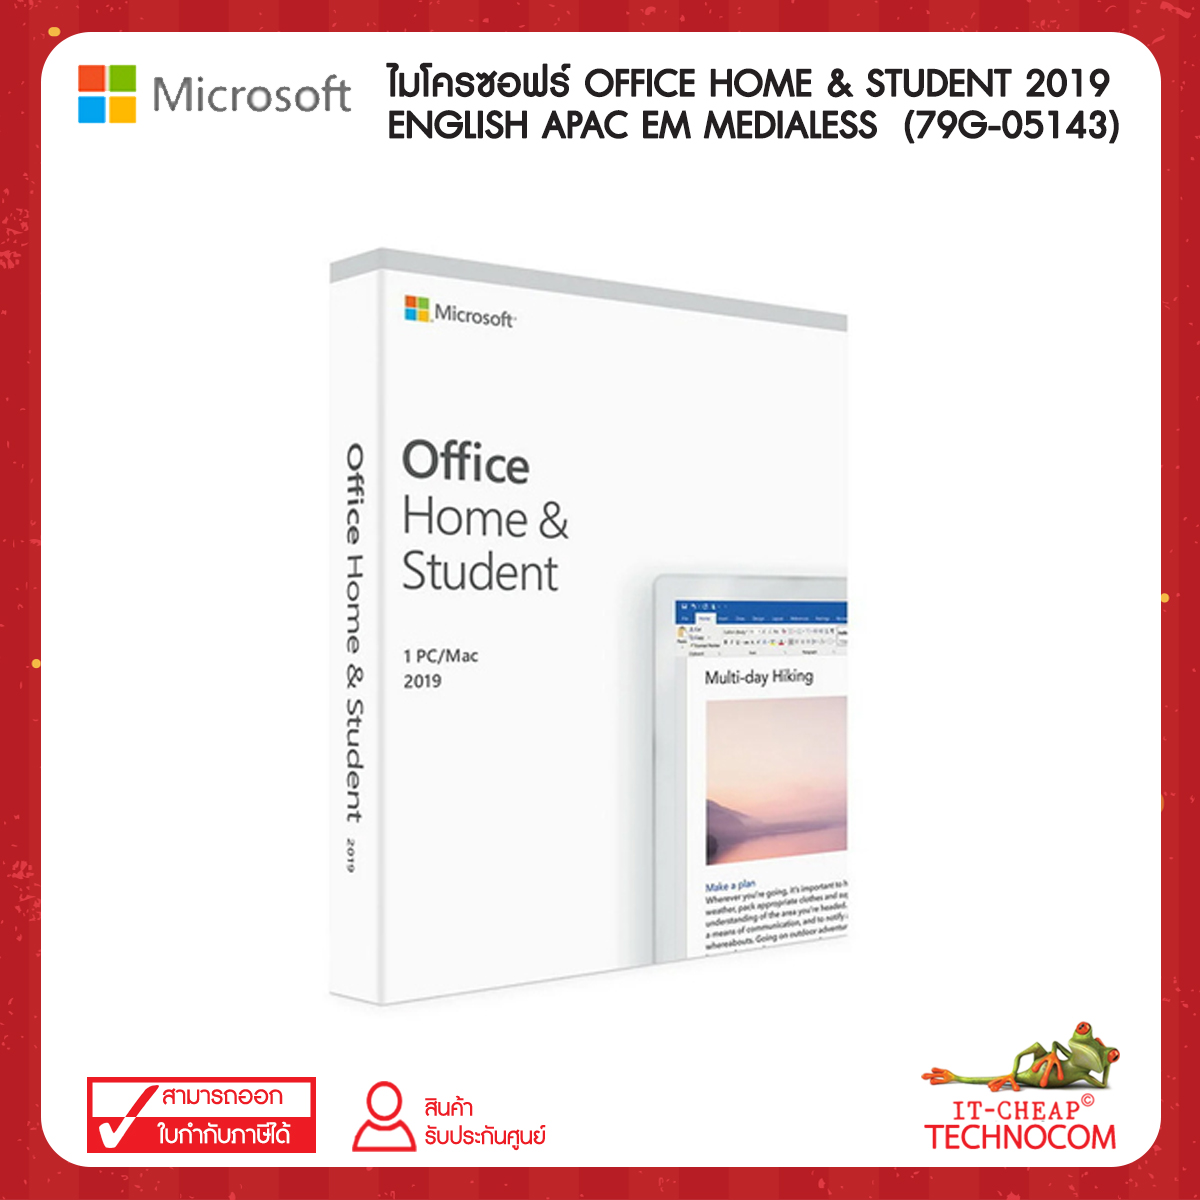 cheapest way to buy office for mac